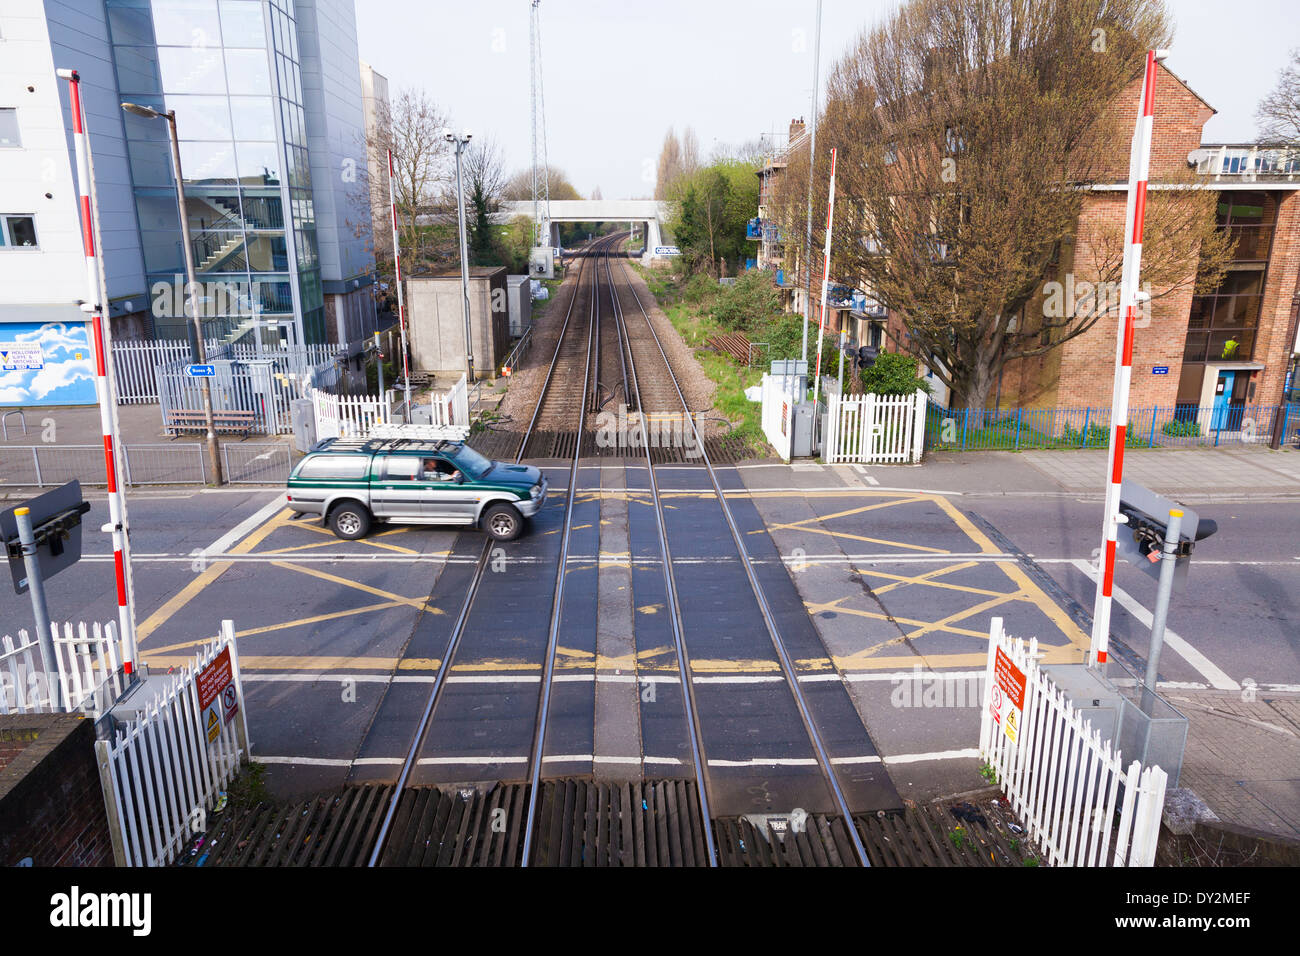 Looking down on railway level crossing with barriers up. Stock Photo